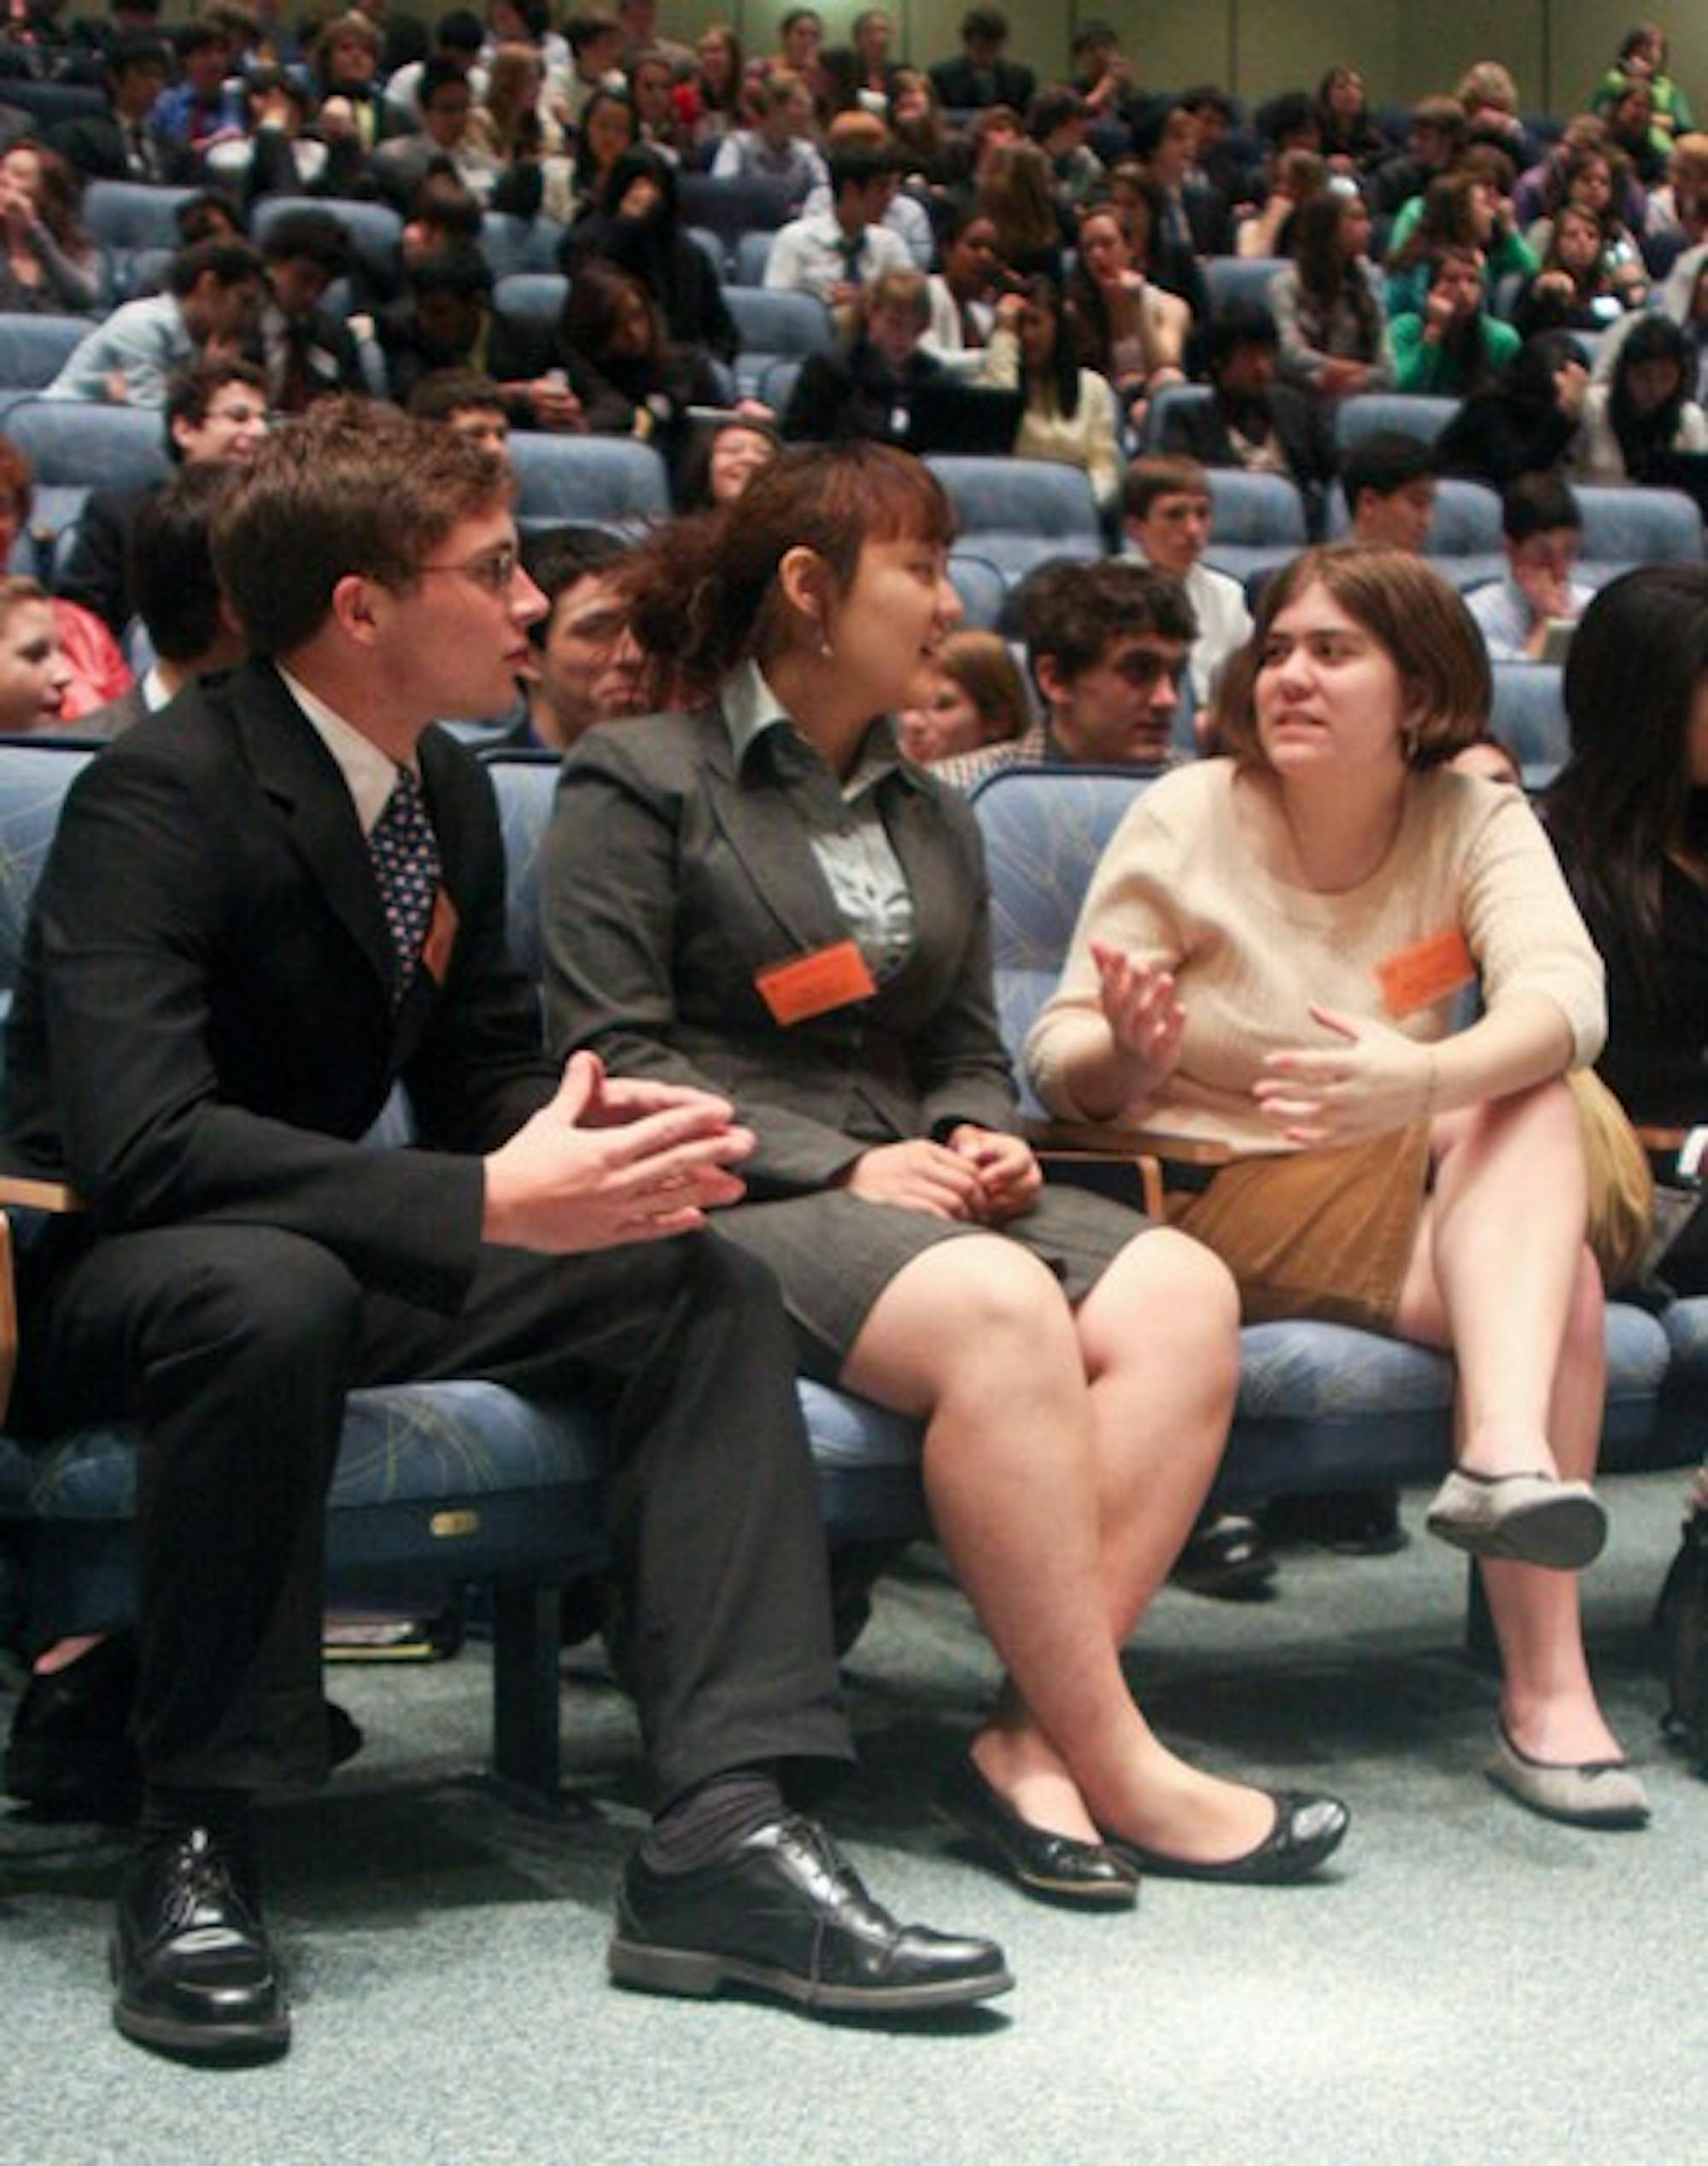 Dartmouth Model United Nations held a conference this weekend that was attended by 217 high school students.